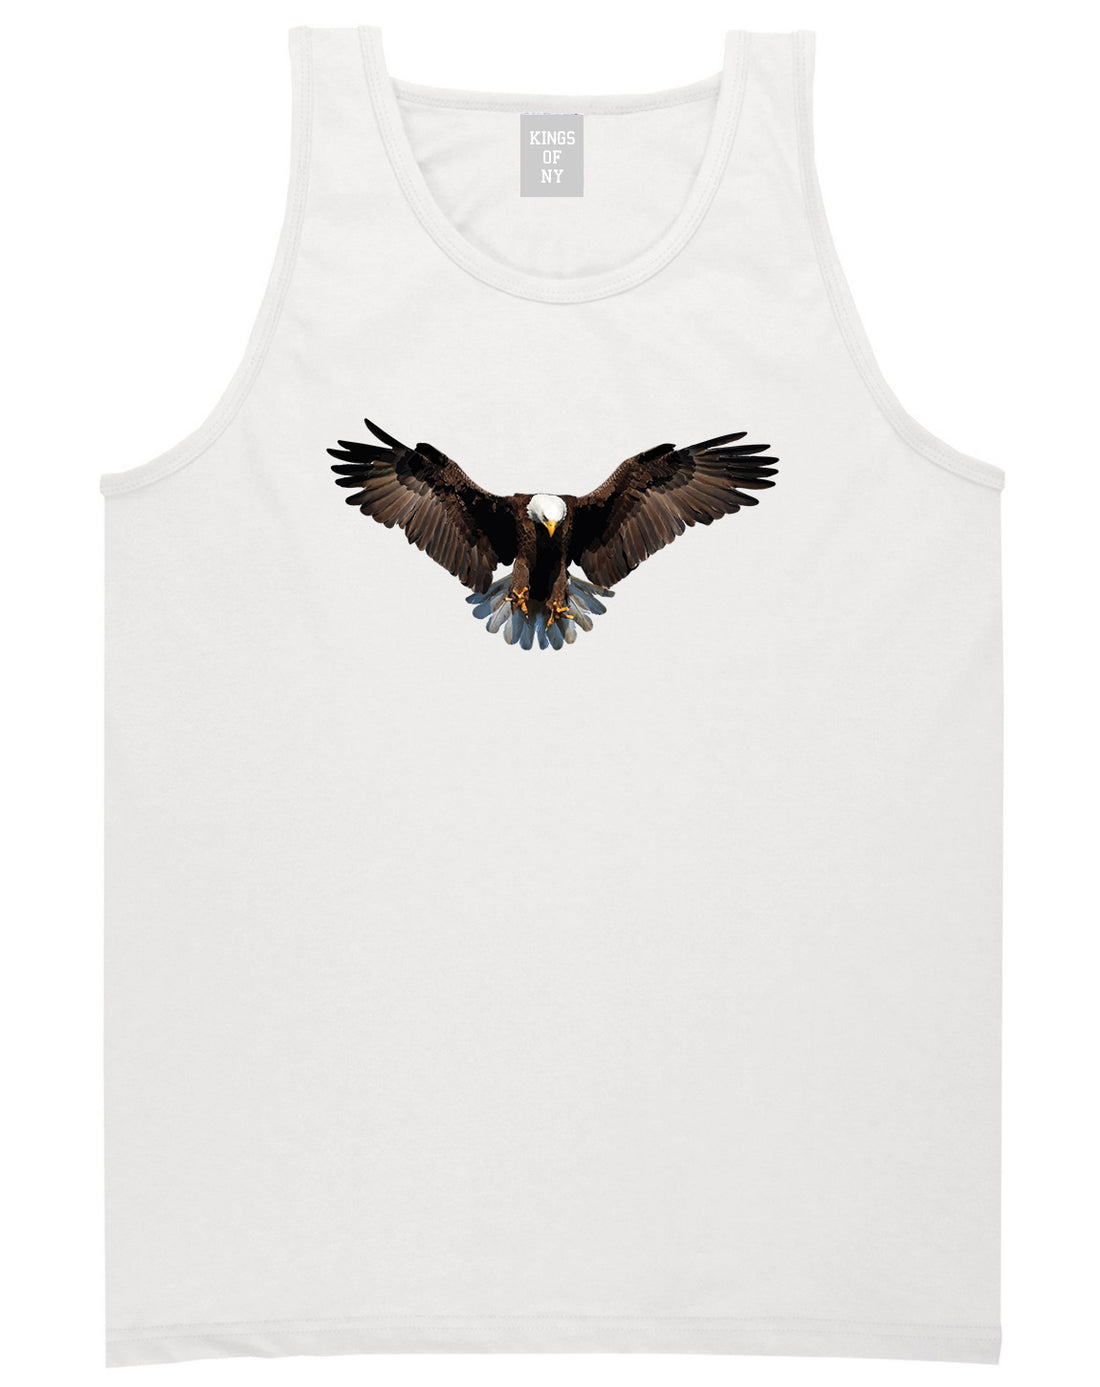 Bald Eagle Wings Spread White Tank Top Shirt by Kings Of NY